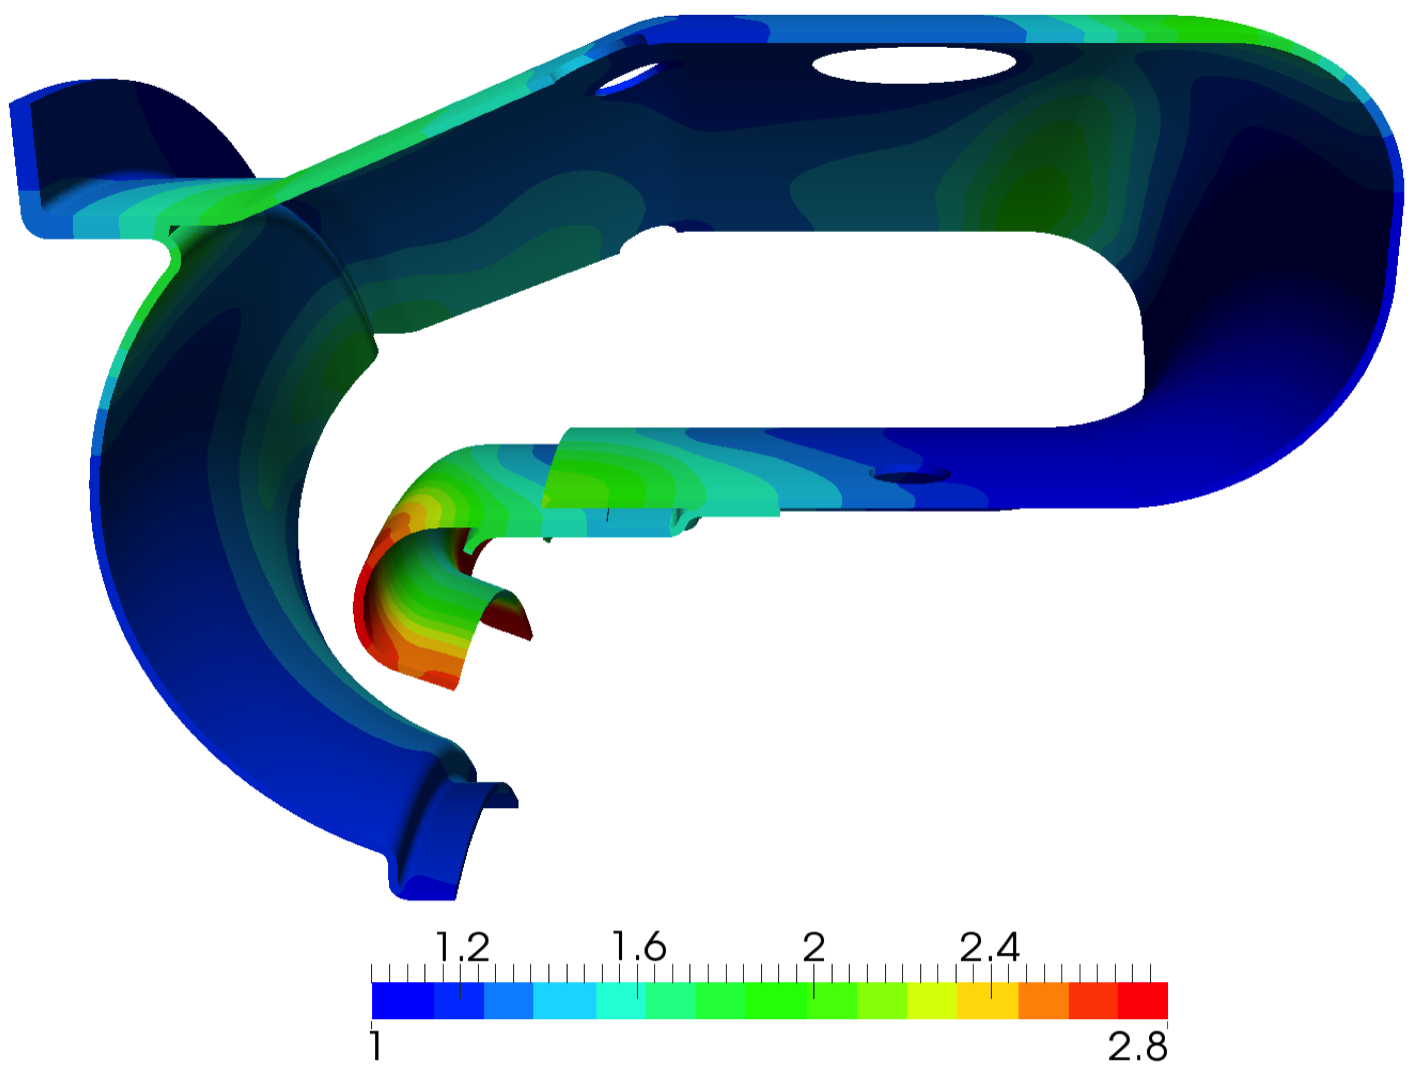 Conjugate heat transfer in a helicopter combustion chamber. Representation of the liner normalized temperature.
                <br><B>Codes used: </B>AVBP, AVTP, PRISSMA
                <br><B>Reference: </B><a href='http://proceedings.asmedigitalcollection.asme.org/proceeding.aspx?articleid=2428270' target=new>ASME TurboExpo</a>